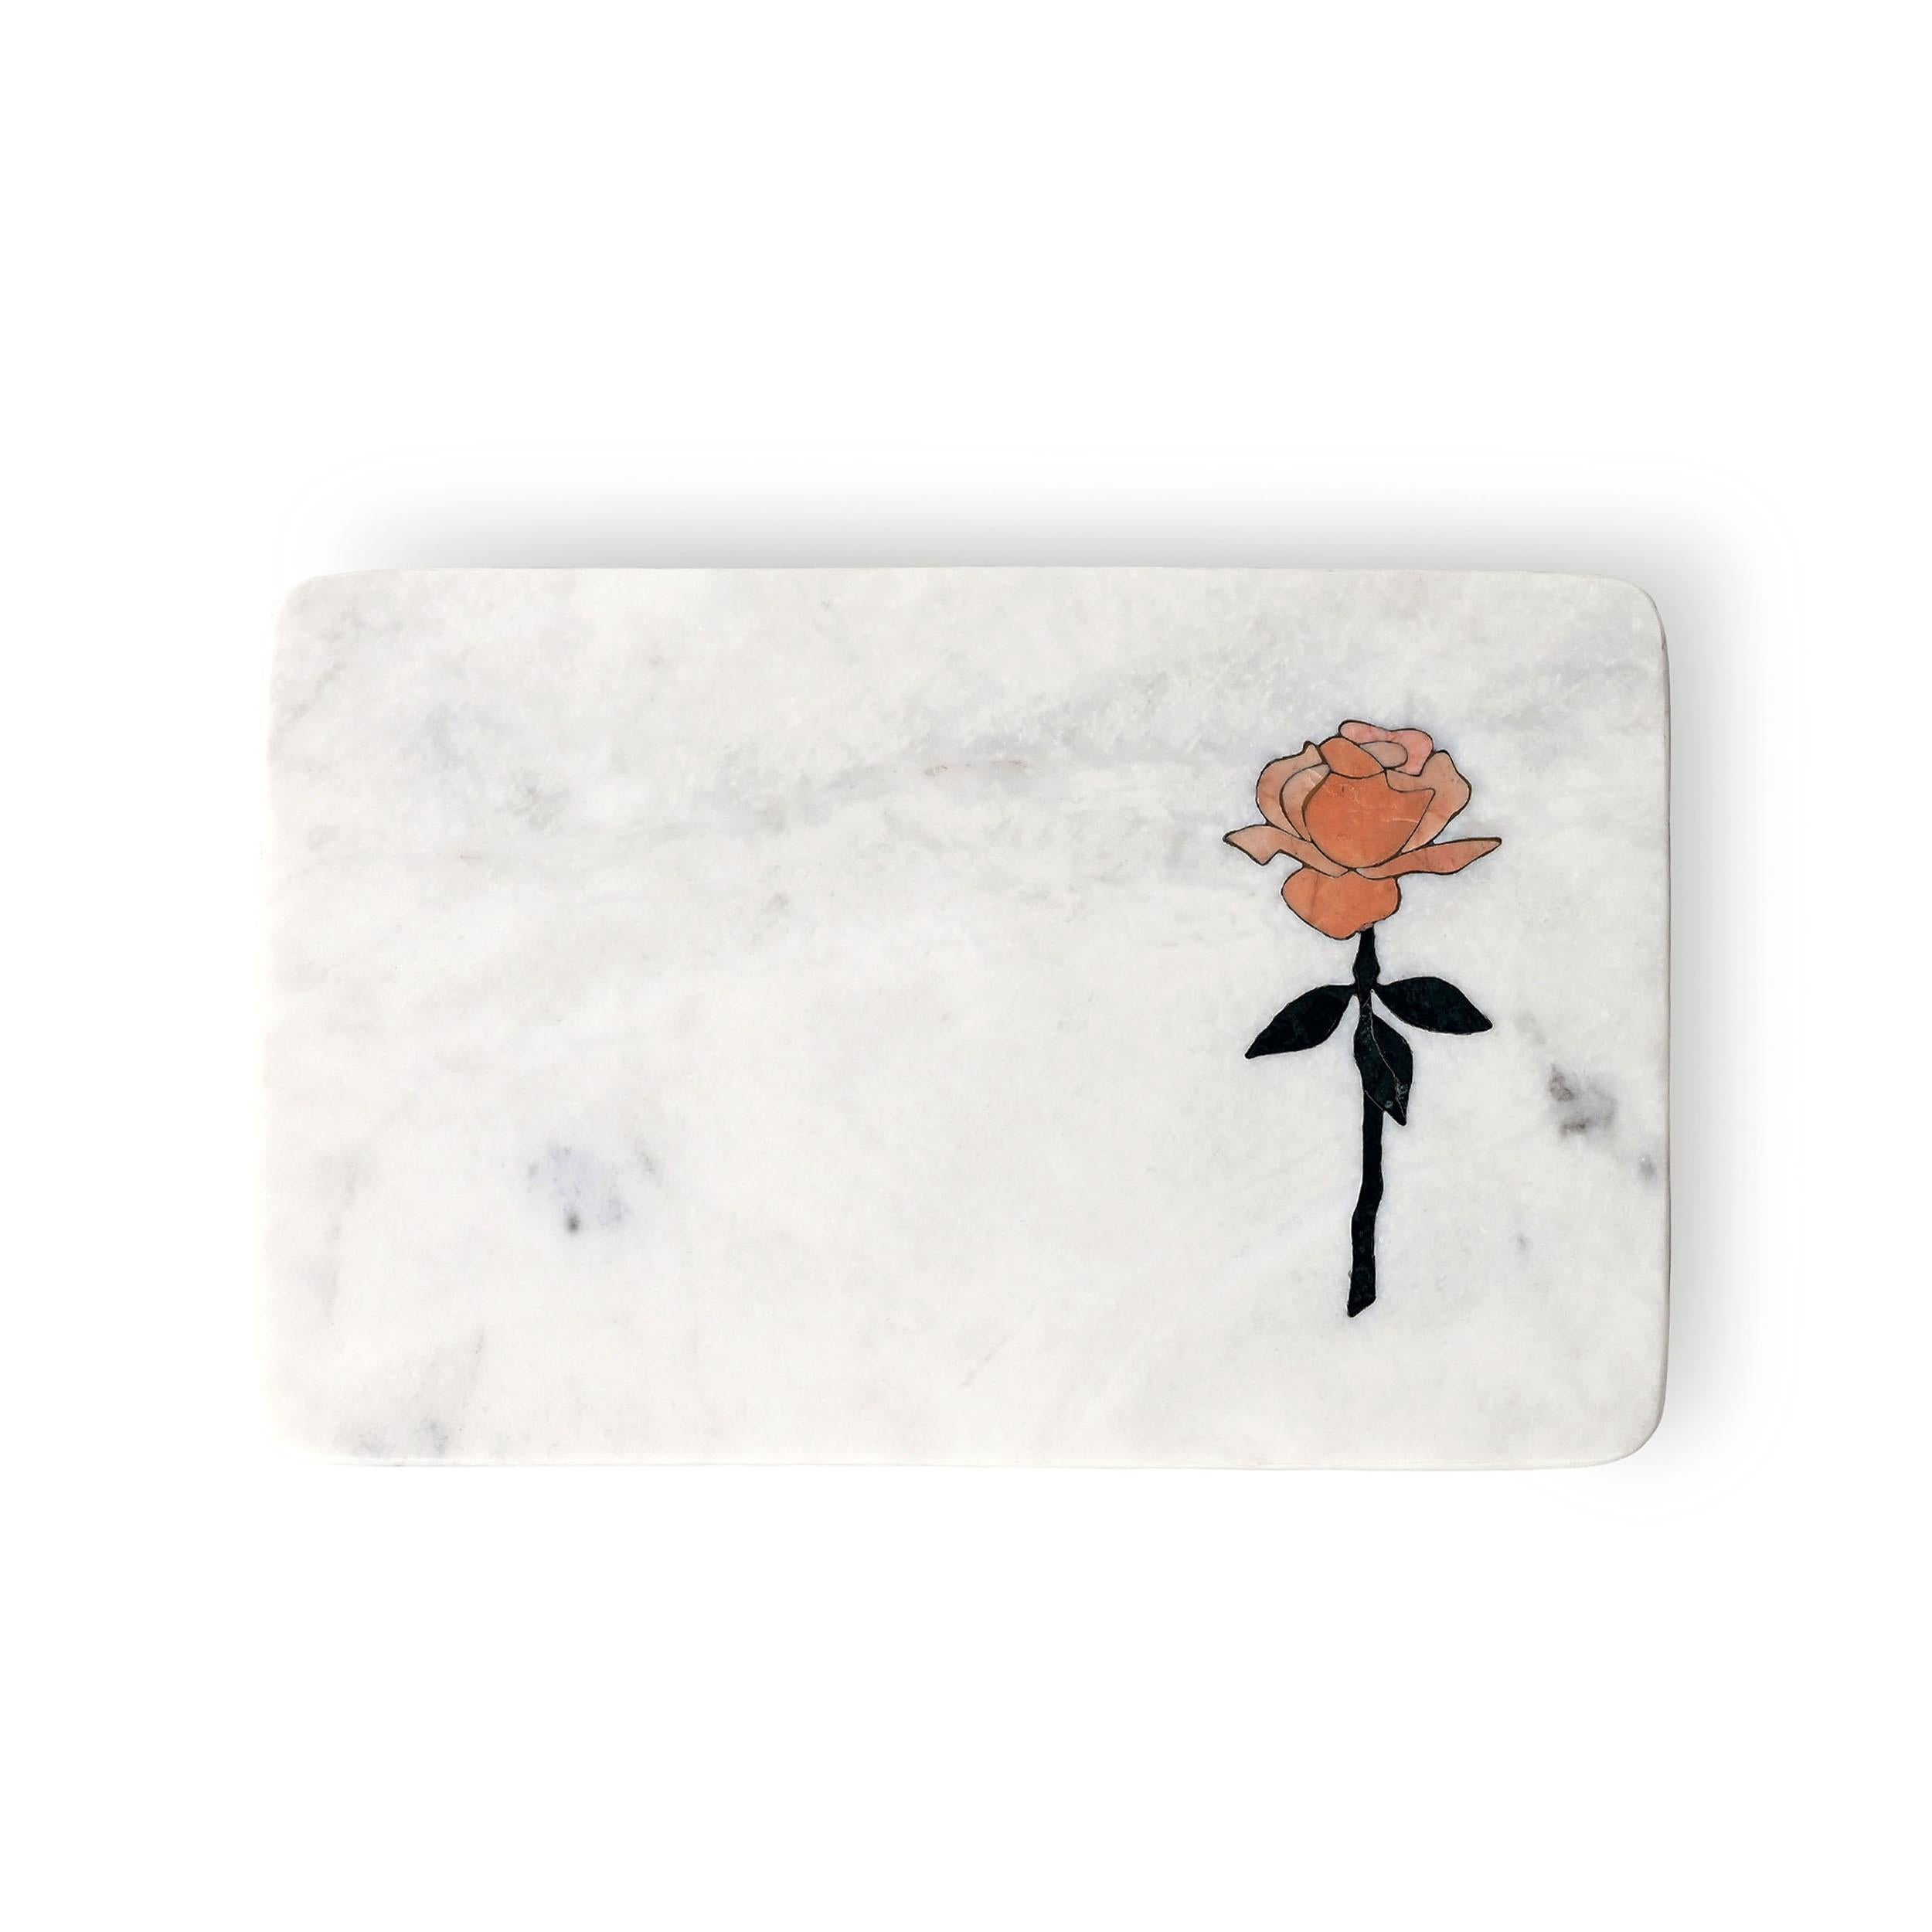 Rose platter by Studio Lel
Dimensions: D135.6 x W22.8 x H2.5 cm
Materials: Marble

These are handmade from semiprecious stone and marble in a small artisanal workshop. Please note that variations and slight imperfections are part of its design